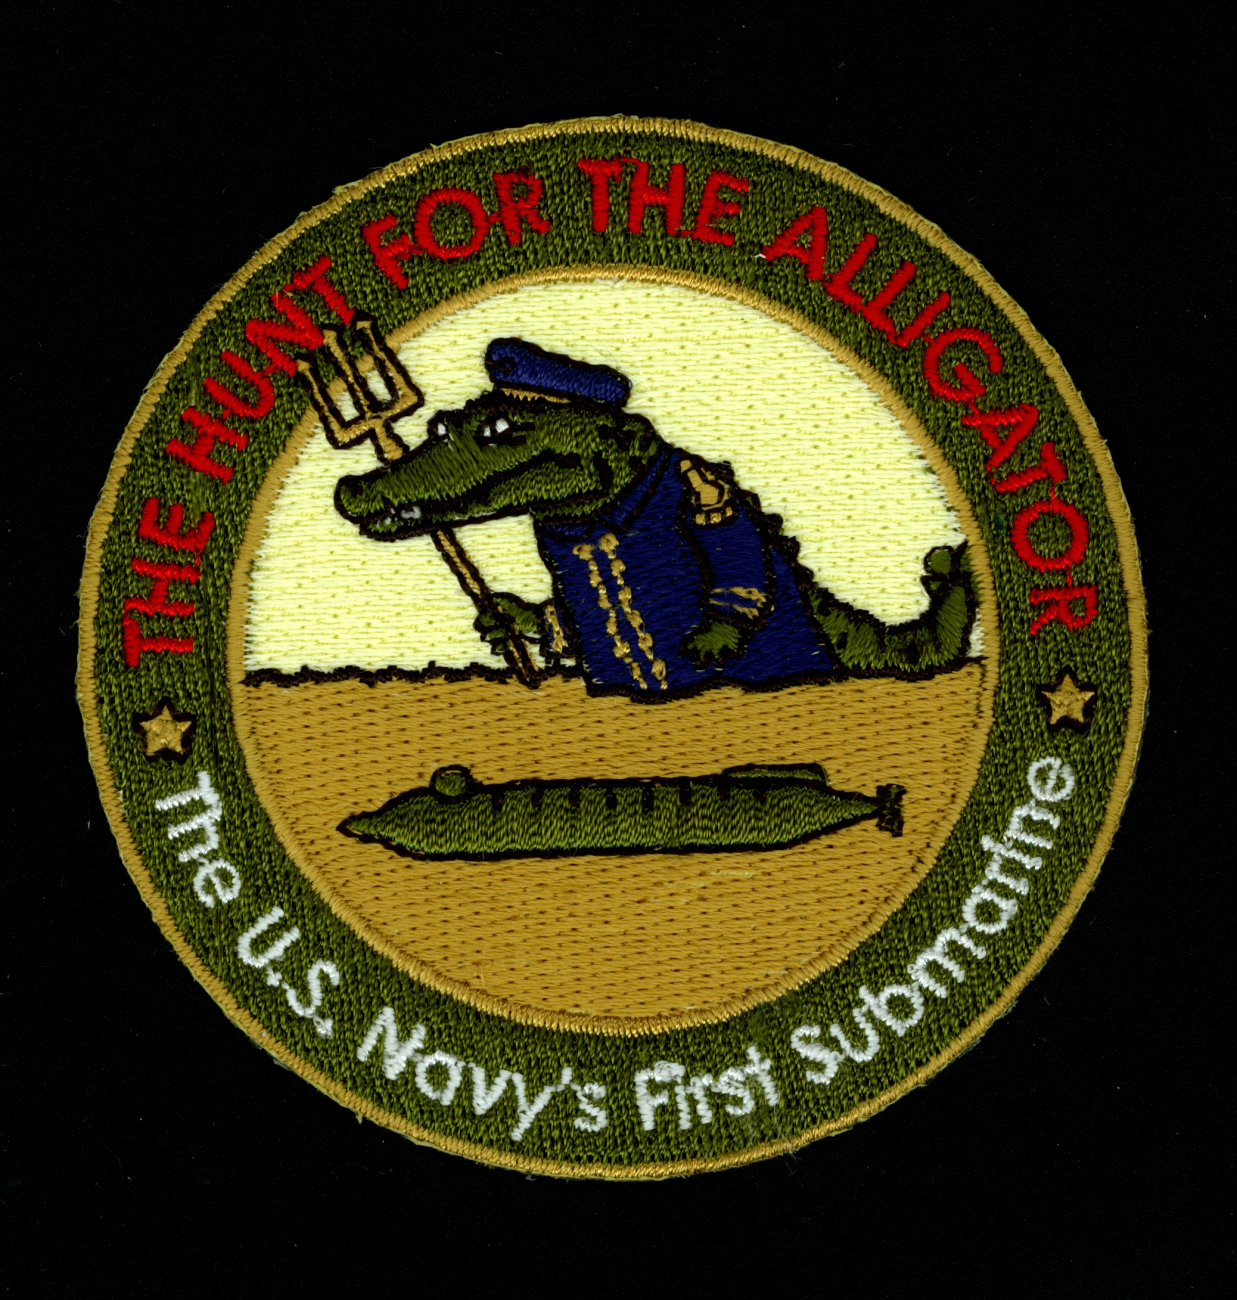 Hunt for the ALLIGATOR patch commemorating the search for the United StatesNavy's first submarine, lost off Cape Hatteras during a storm in 1863